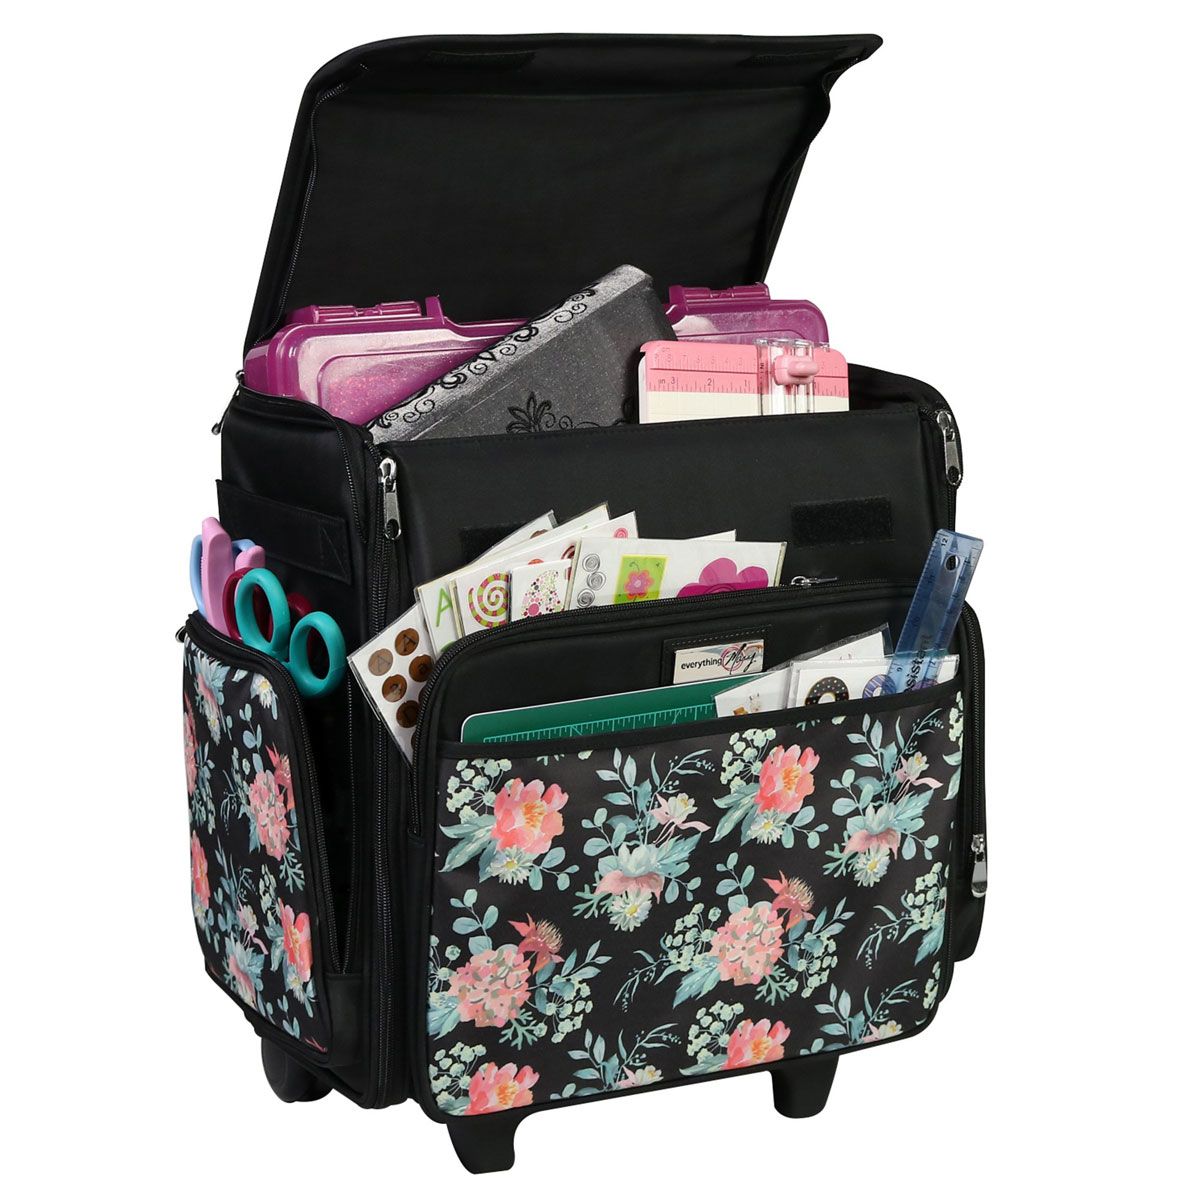 Everything Mary 12777-2 Black & Floral Rolling Tote Bag, 2 Wheeled